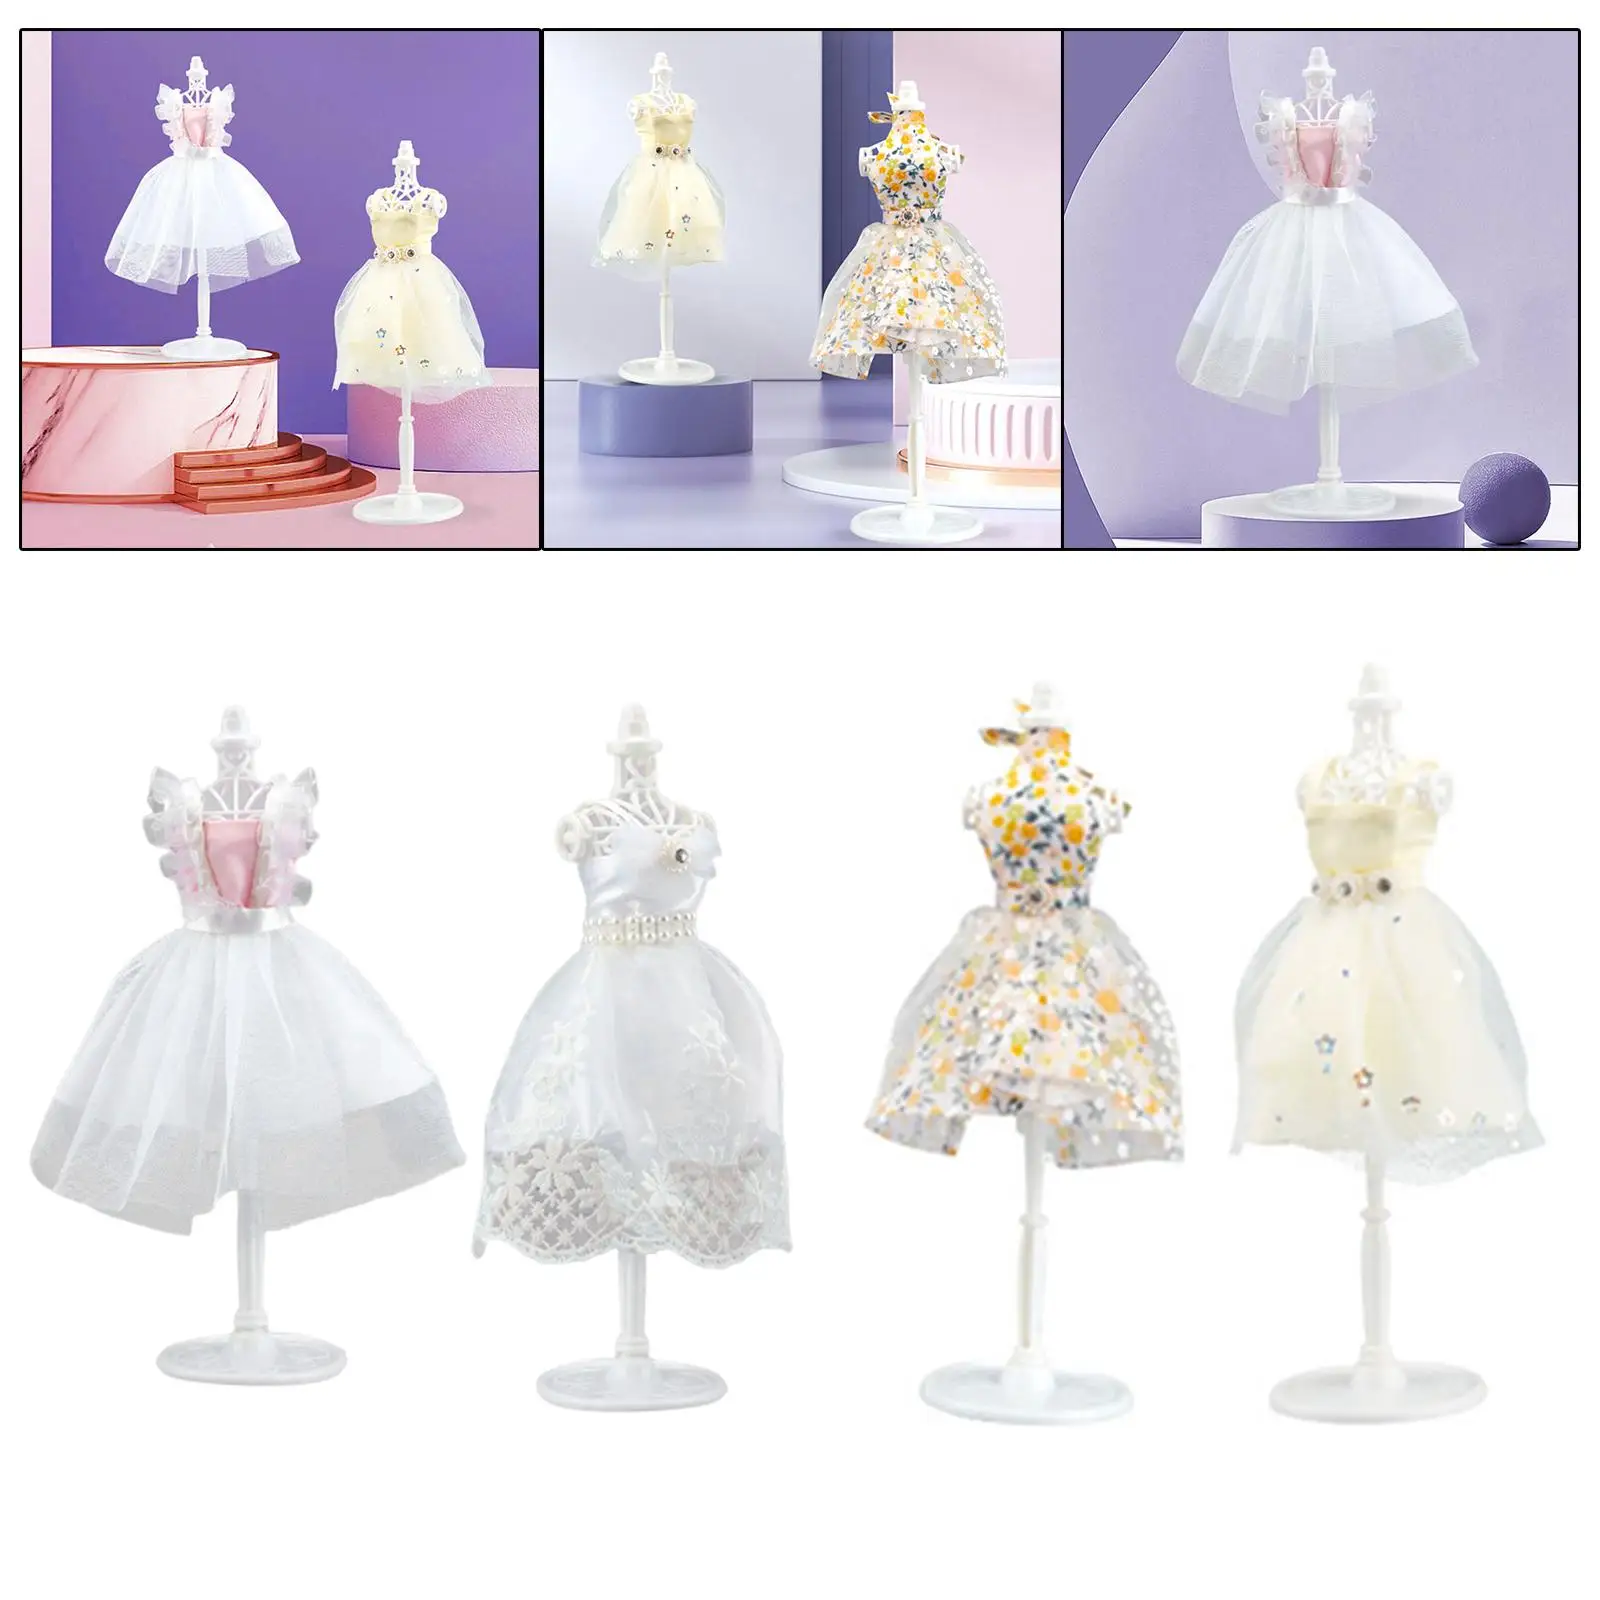 Fashion Design Kit Doll Clothes Making Learning Toys Creativity Exquisite Doll Clothing design for Birthday Gift Beginner